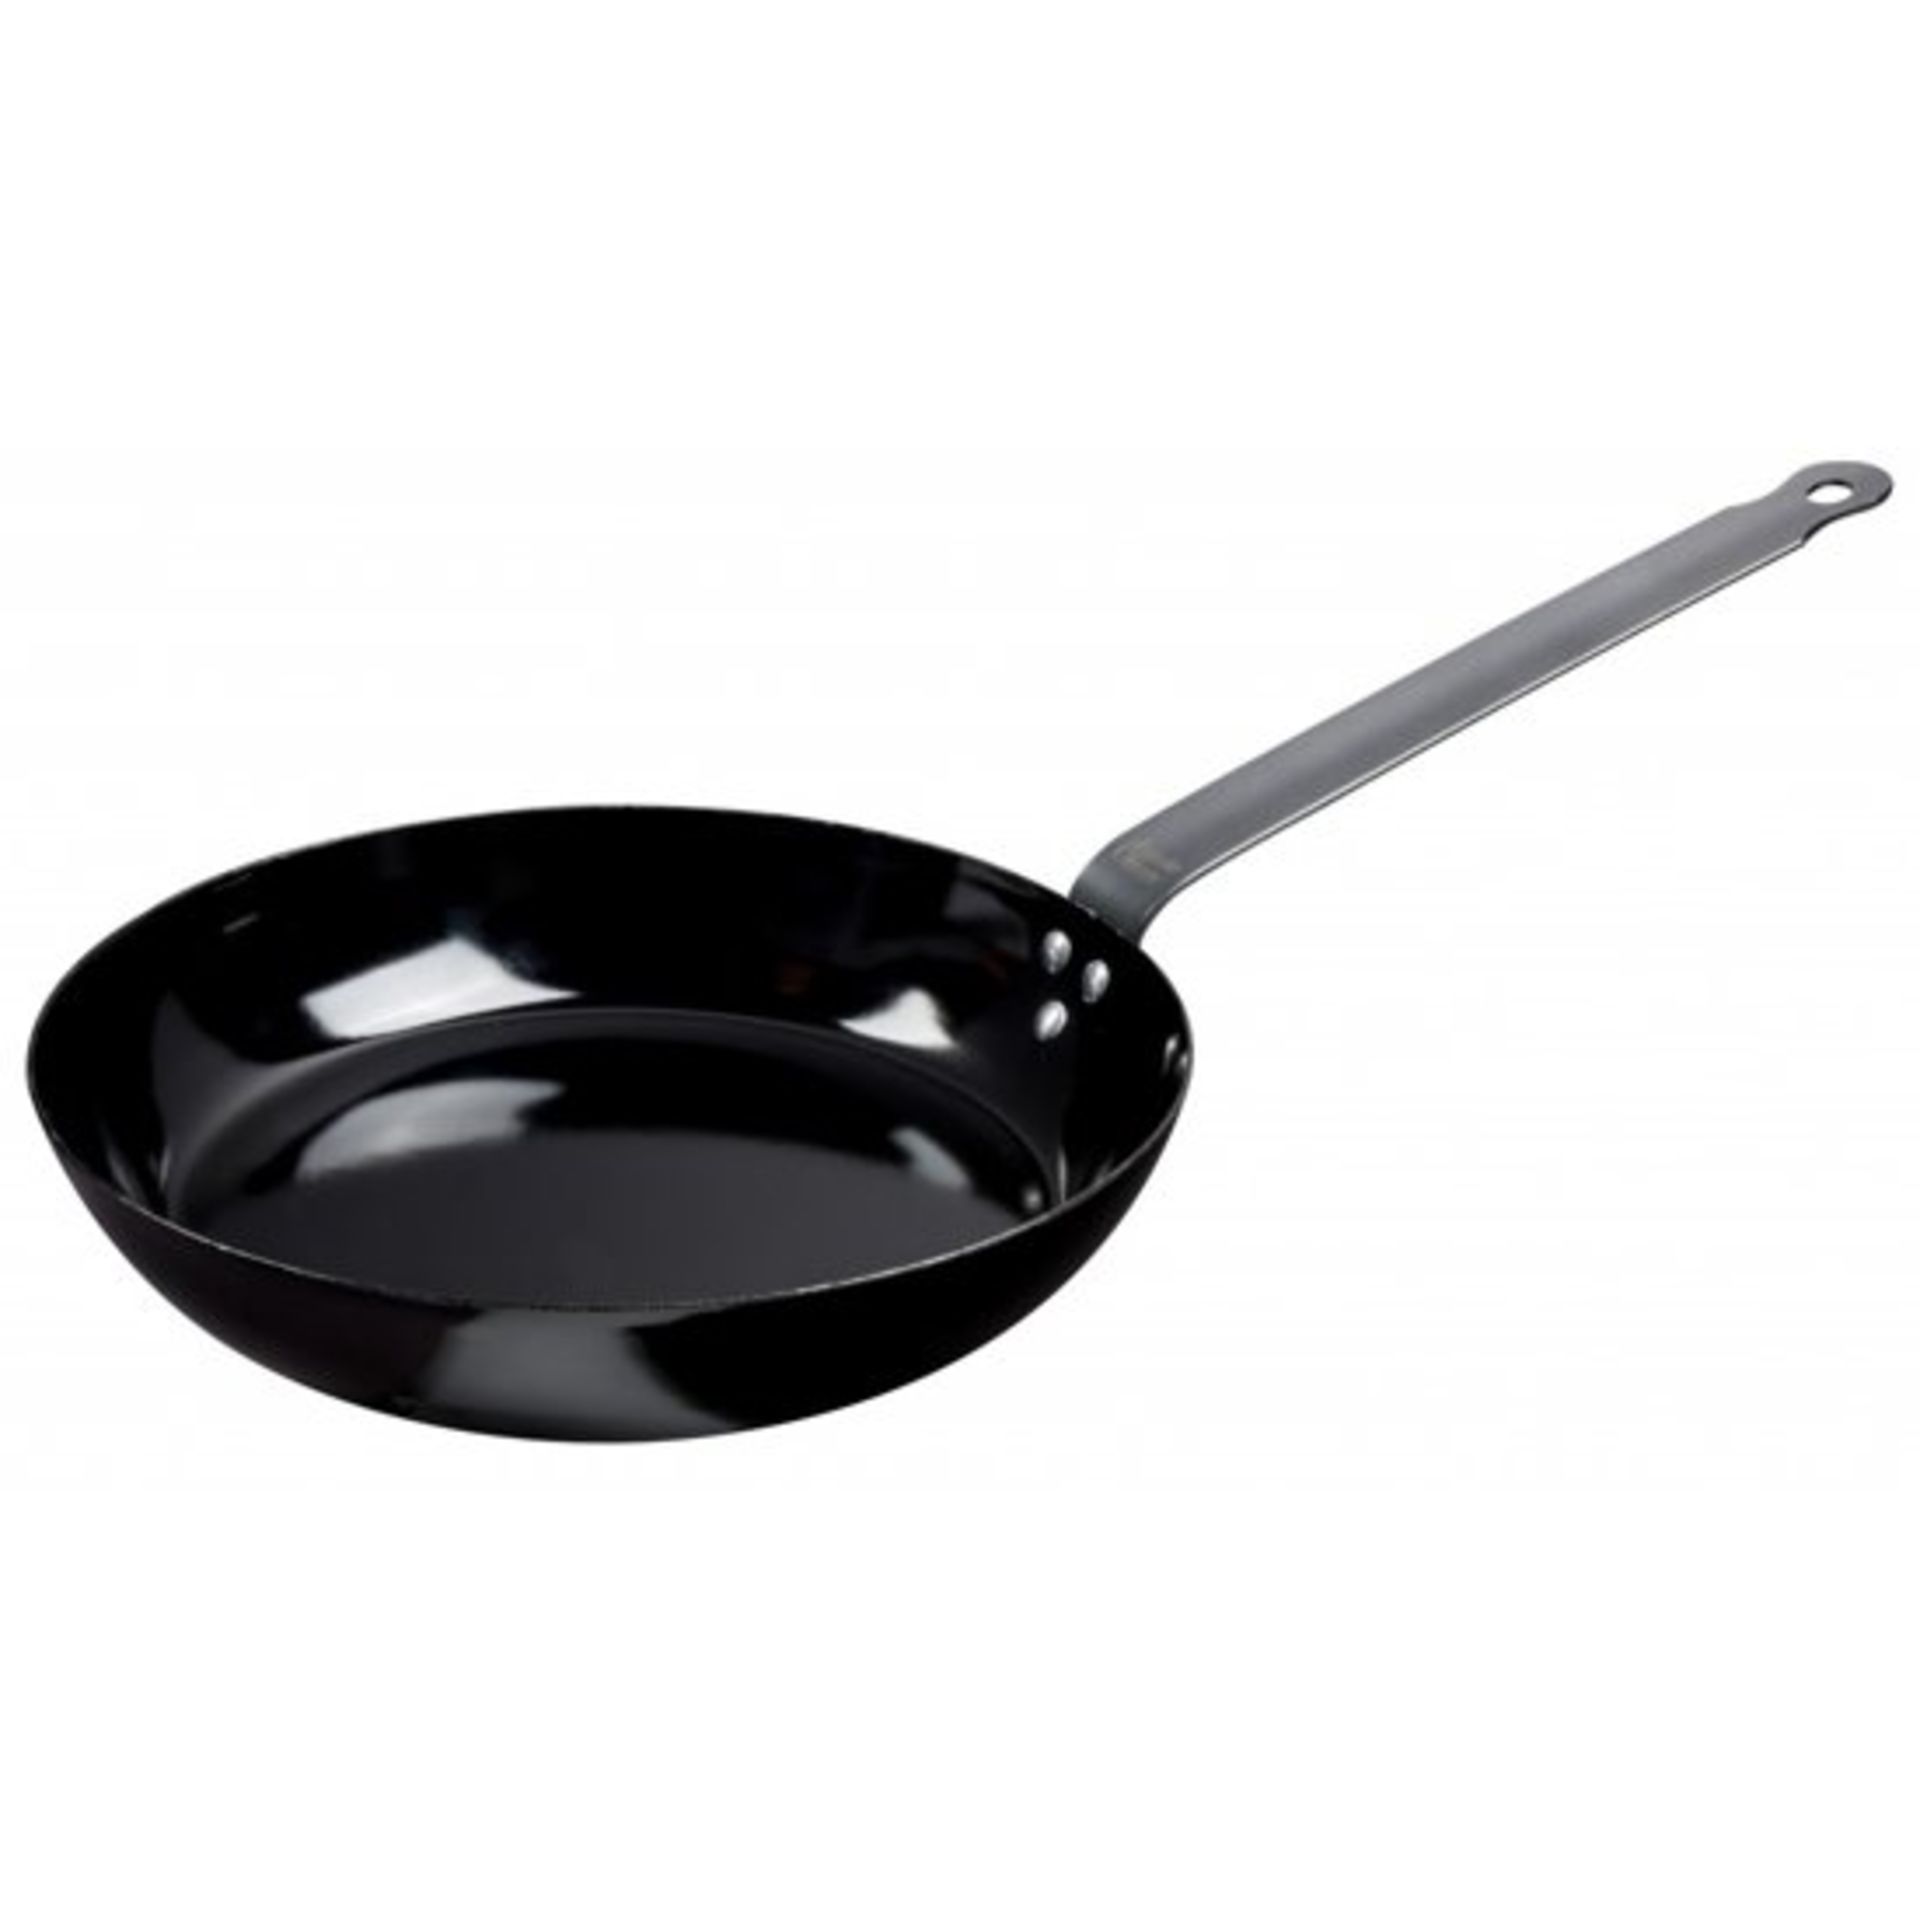 V Brand New Jamie Oliver 24cm BBQ Frying Pan - Carbon Steel With Enamel Coating, Heat Resistant Up - Image 2 of 2